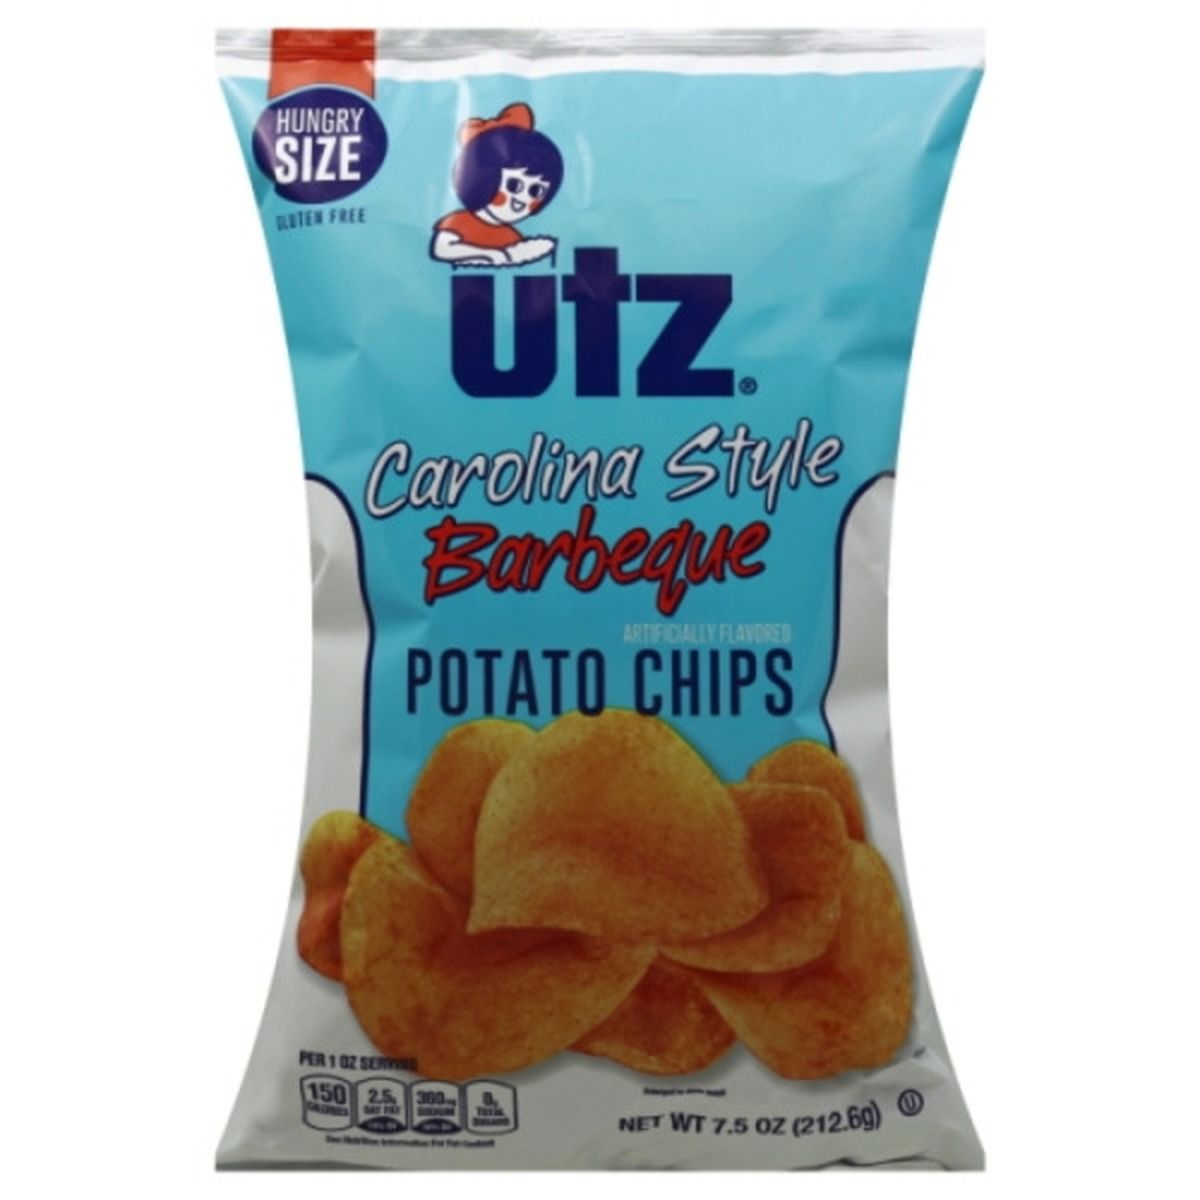 Calories in Utz Potato Chips, Barbeque, Carolina Style, Hungry Size